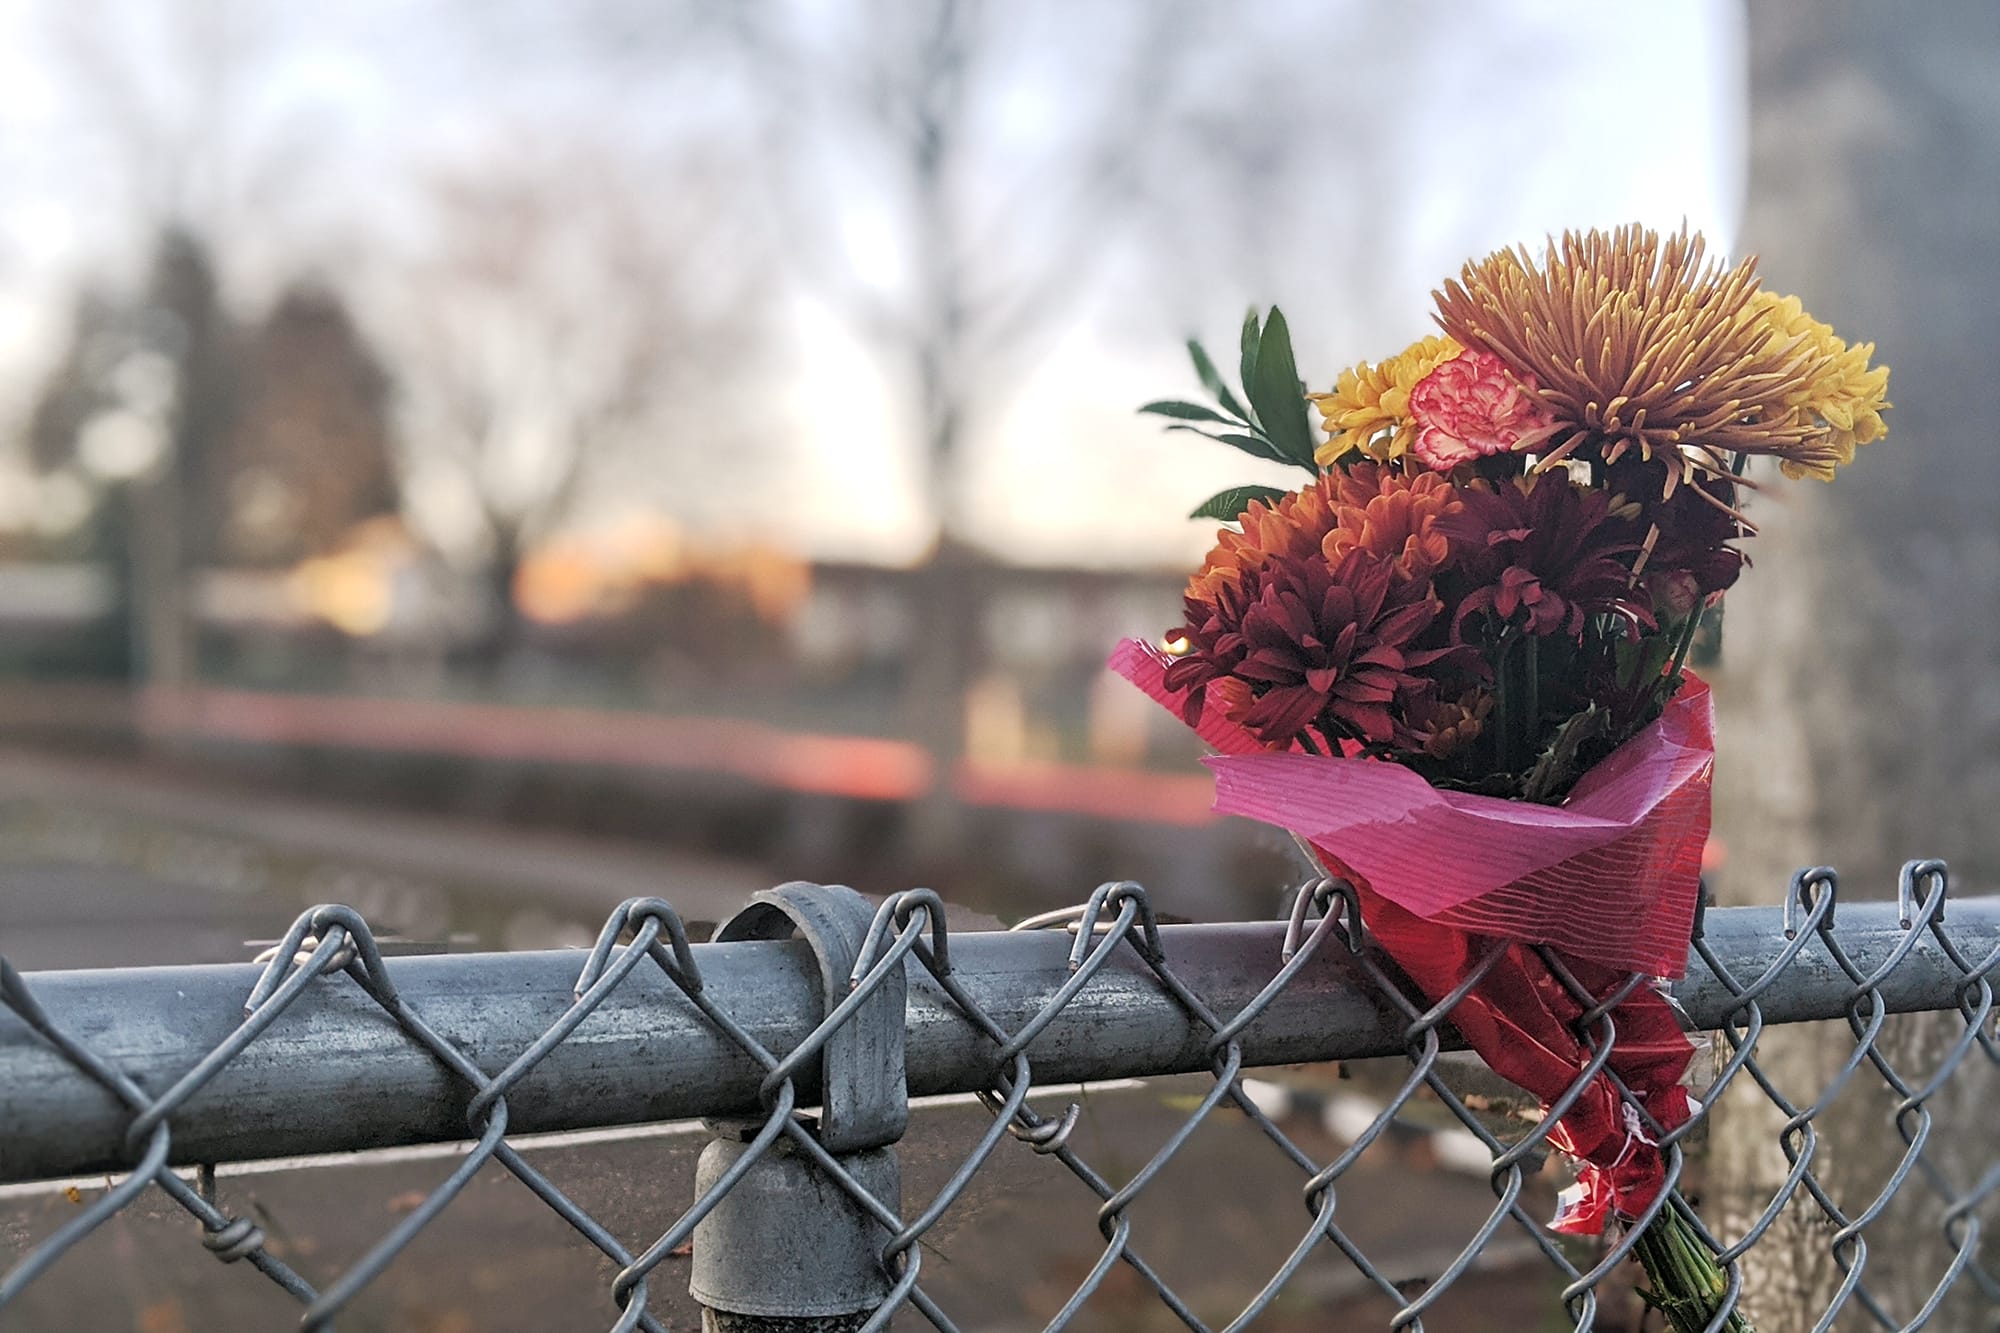 A bouquet of flowers had been placed in the fence on 104th Street near the driveway of Sarah J. Anderson Elementary School on Thursday morning.